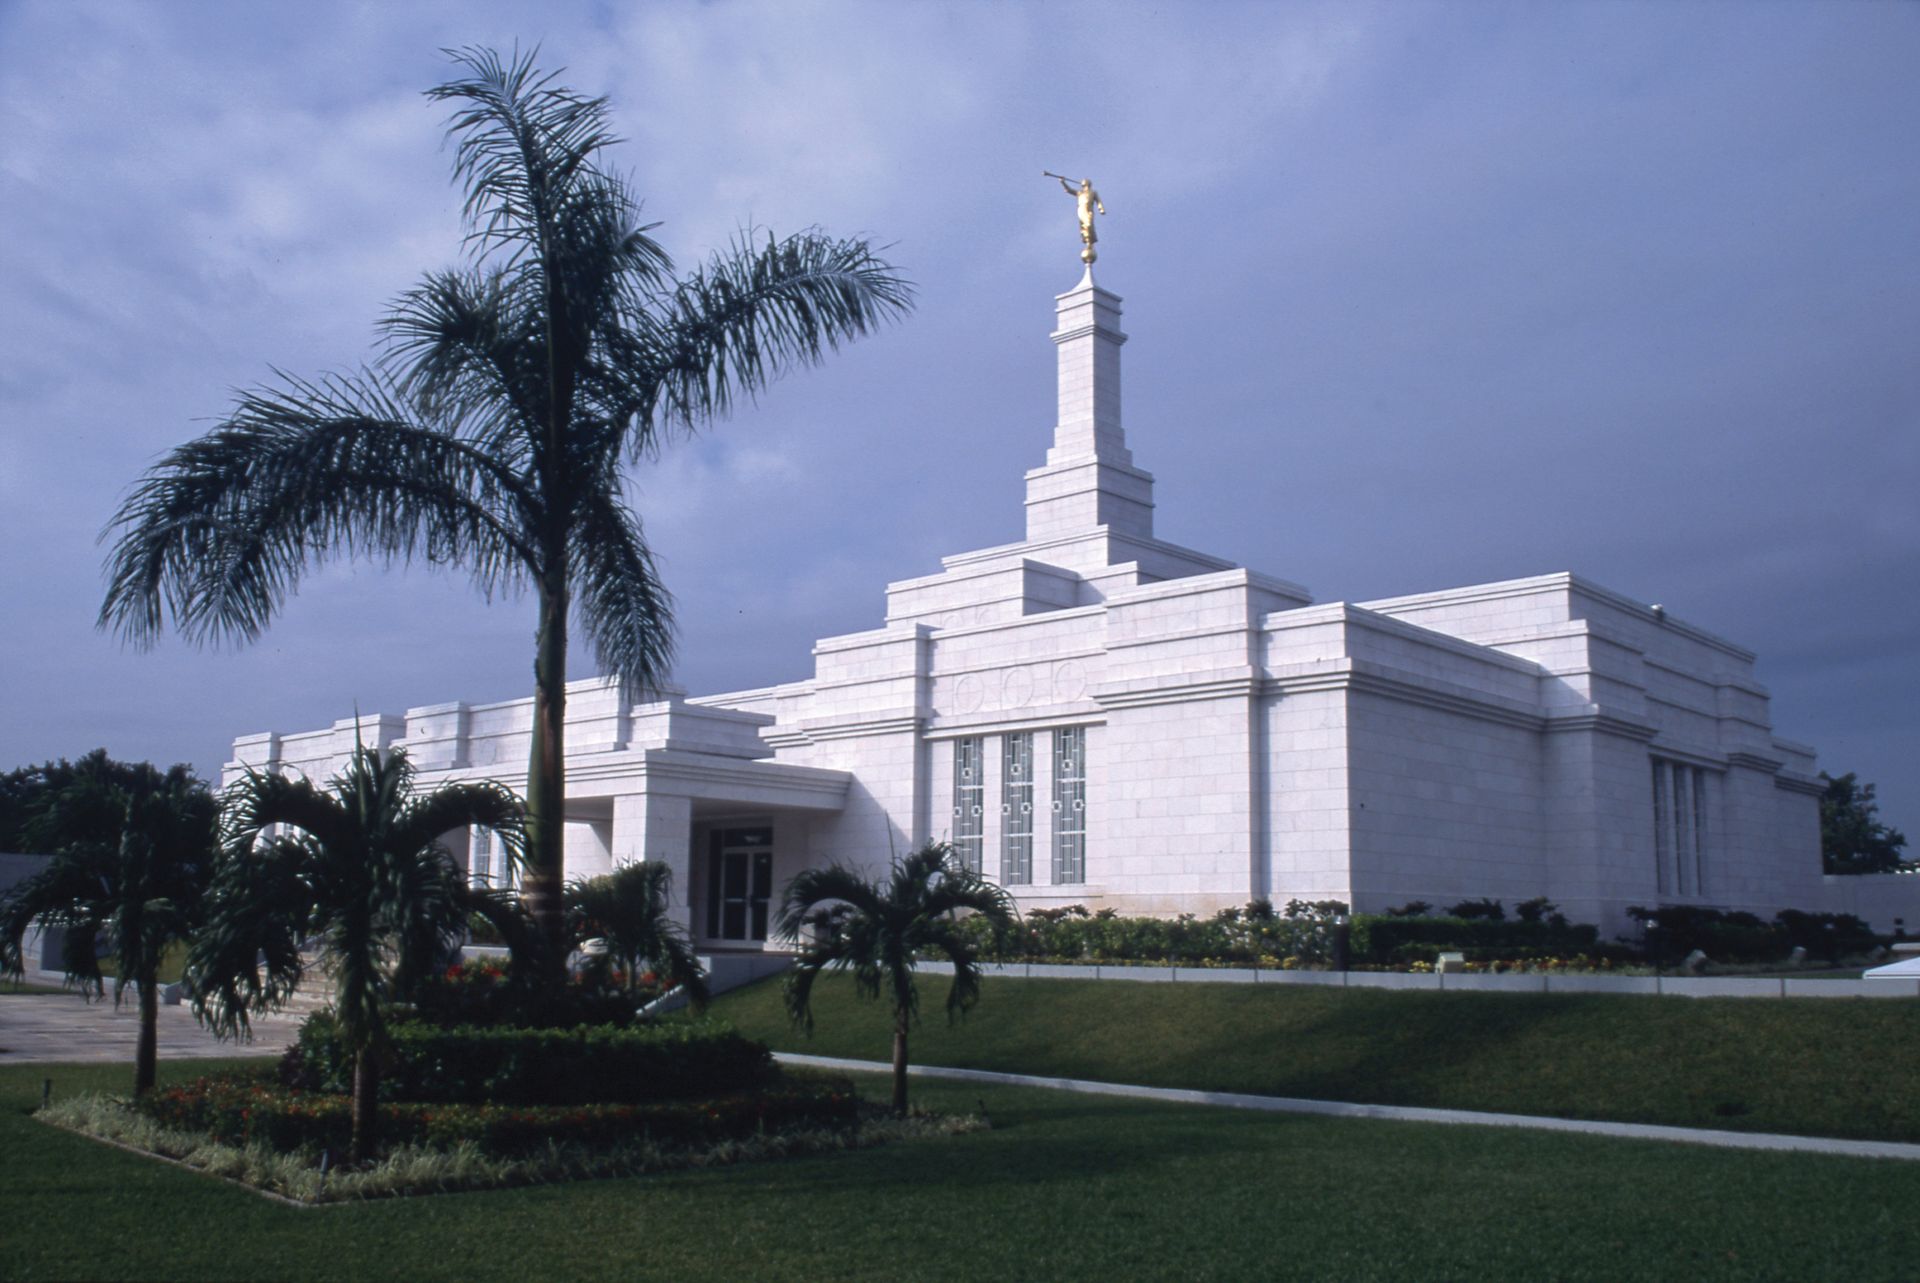 The Mérida Mexico Temple in a storm, including the entrance and scenery.